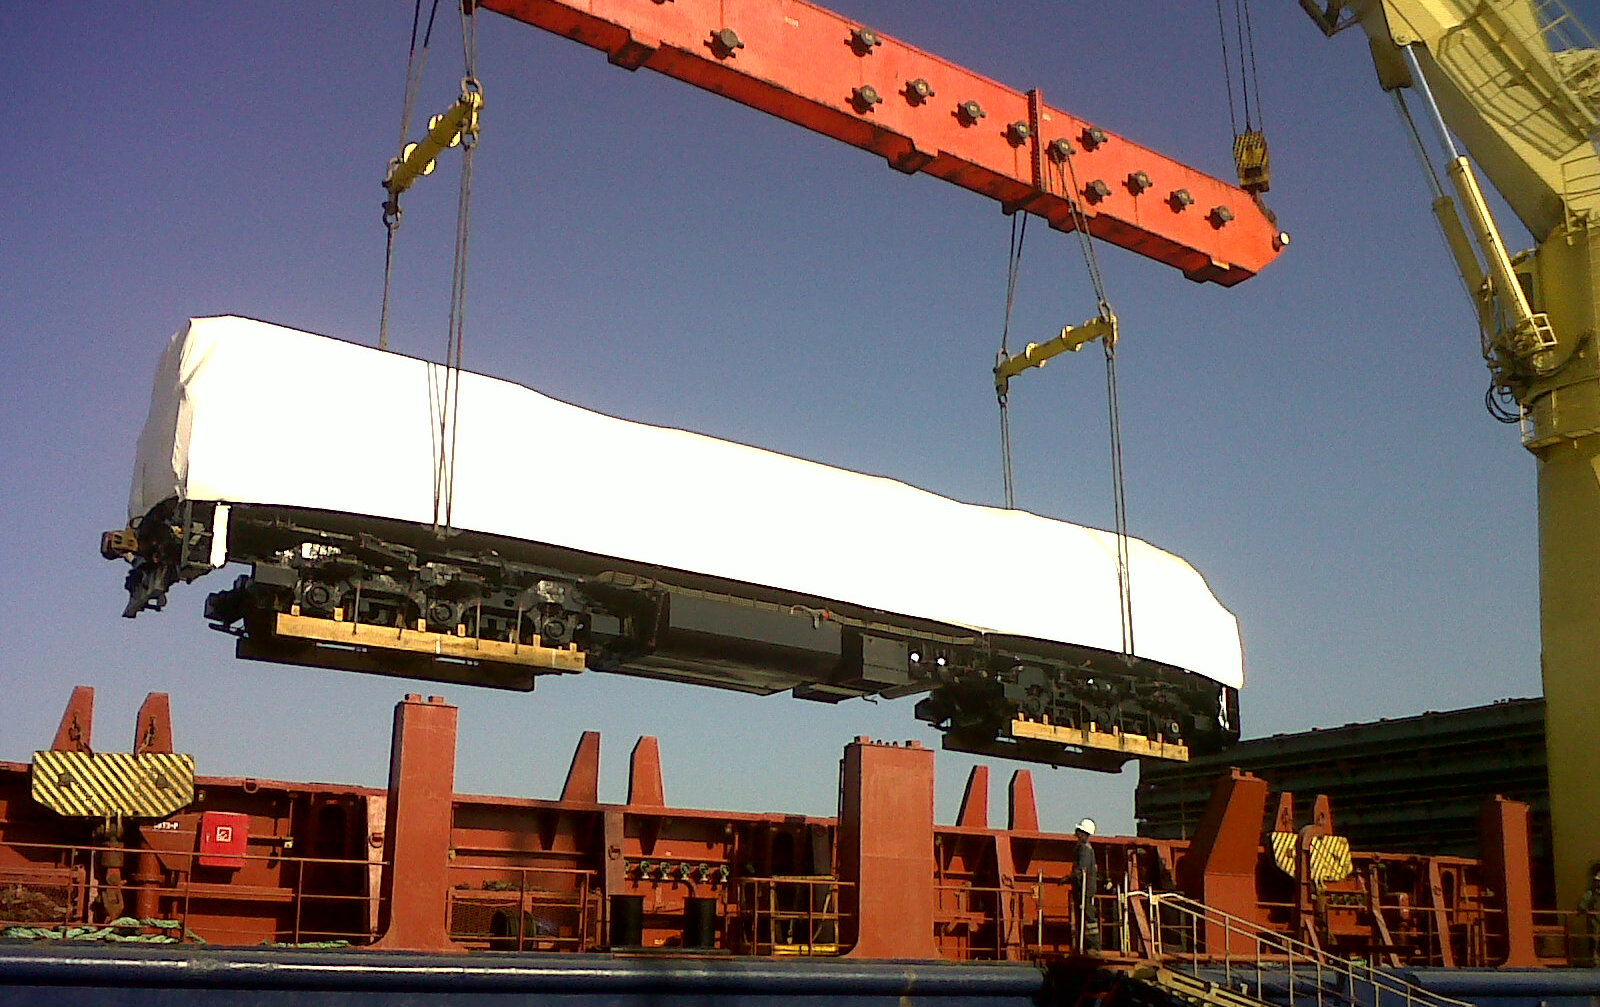 Wallenius Wilhelmsen Logistics Abnormal Load Services - Specialised Transport and Logistics Solutions for Rail Cargo